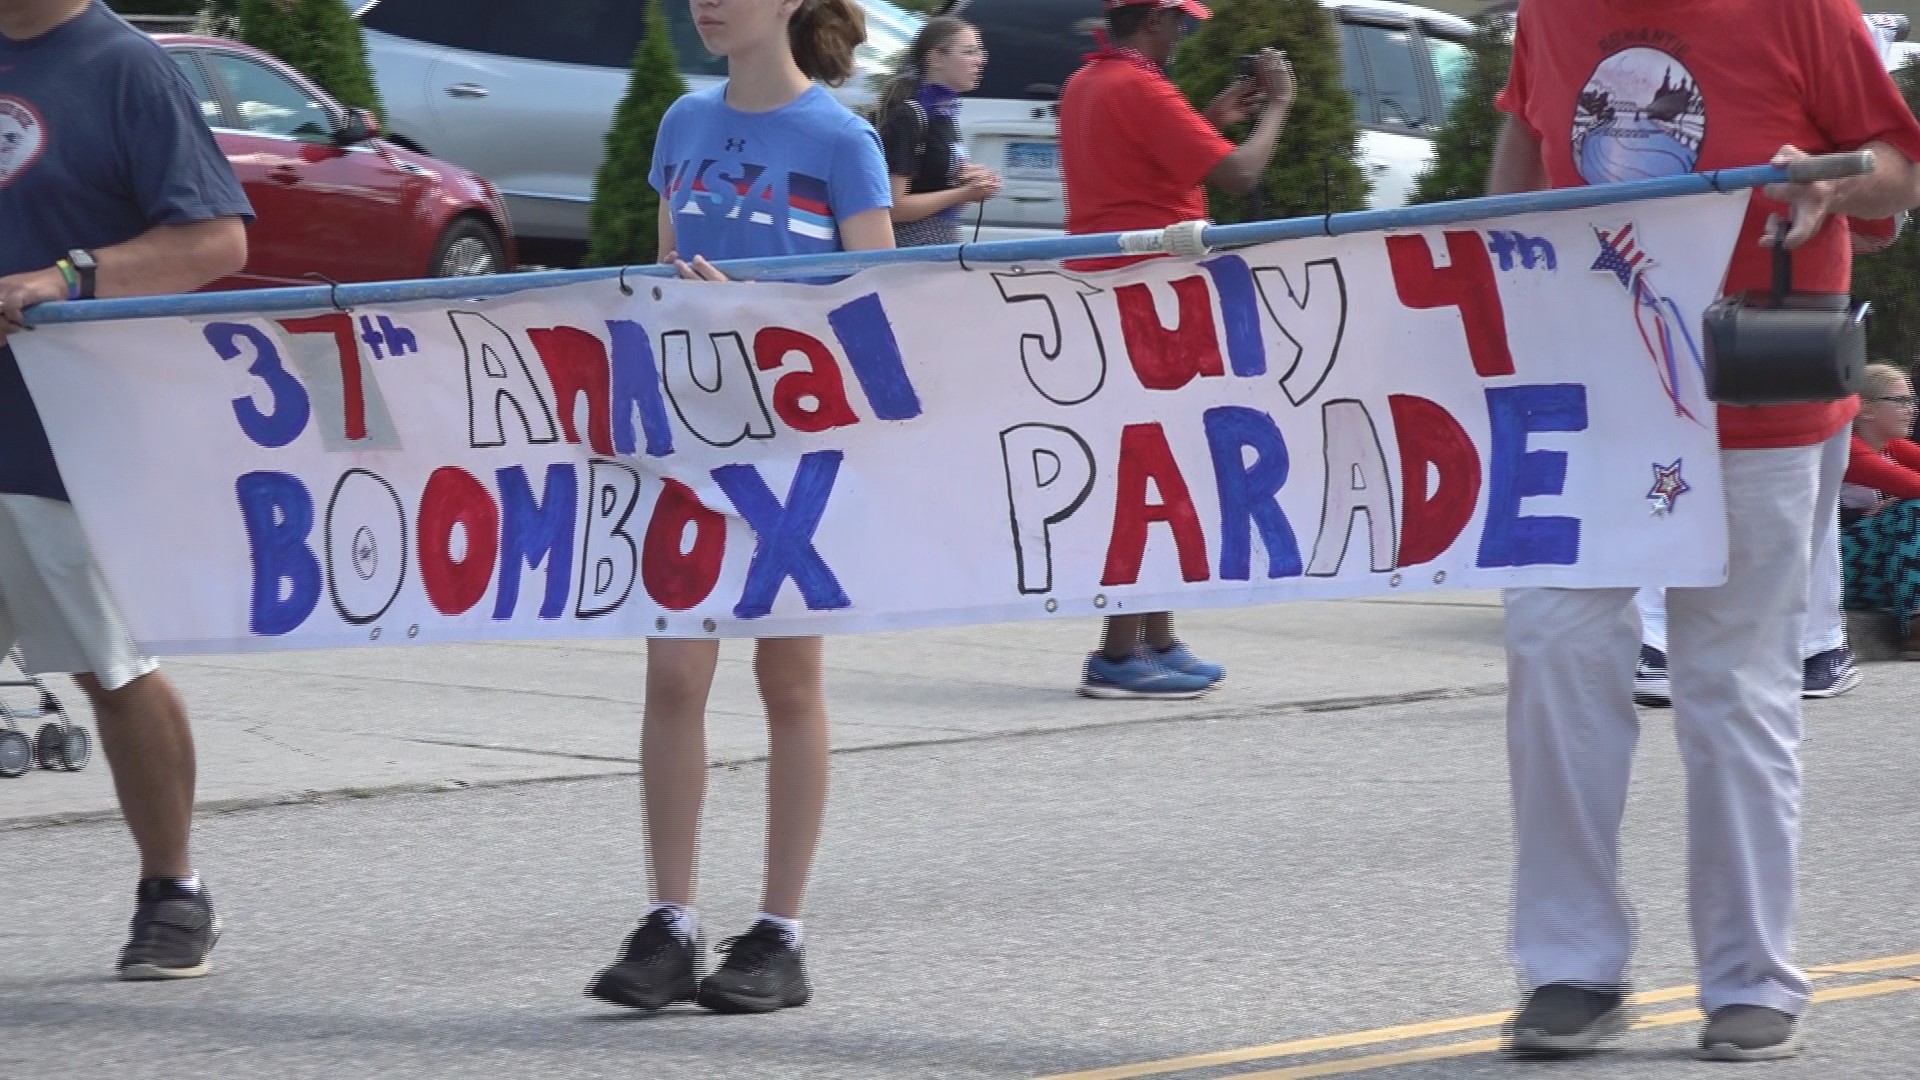 Families celebrate Boom Box parade in Willimantic